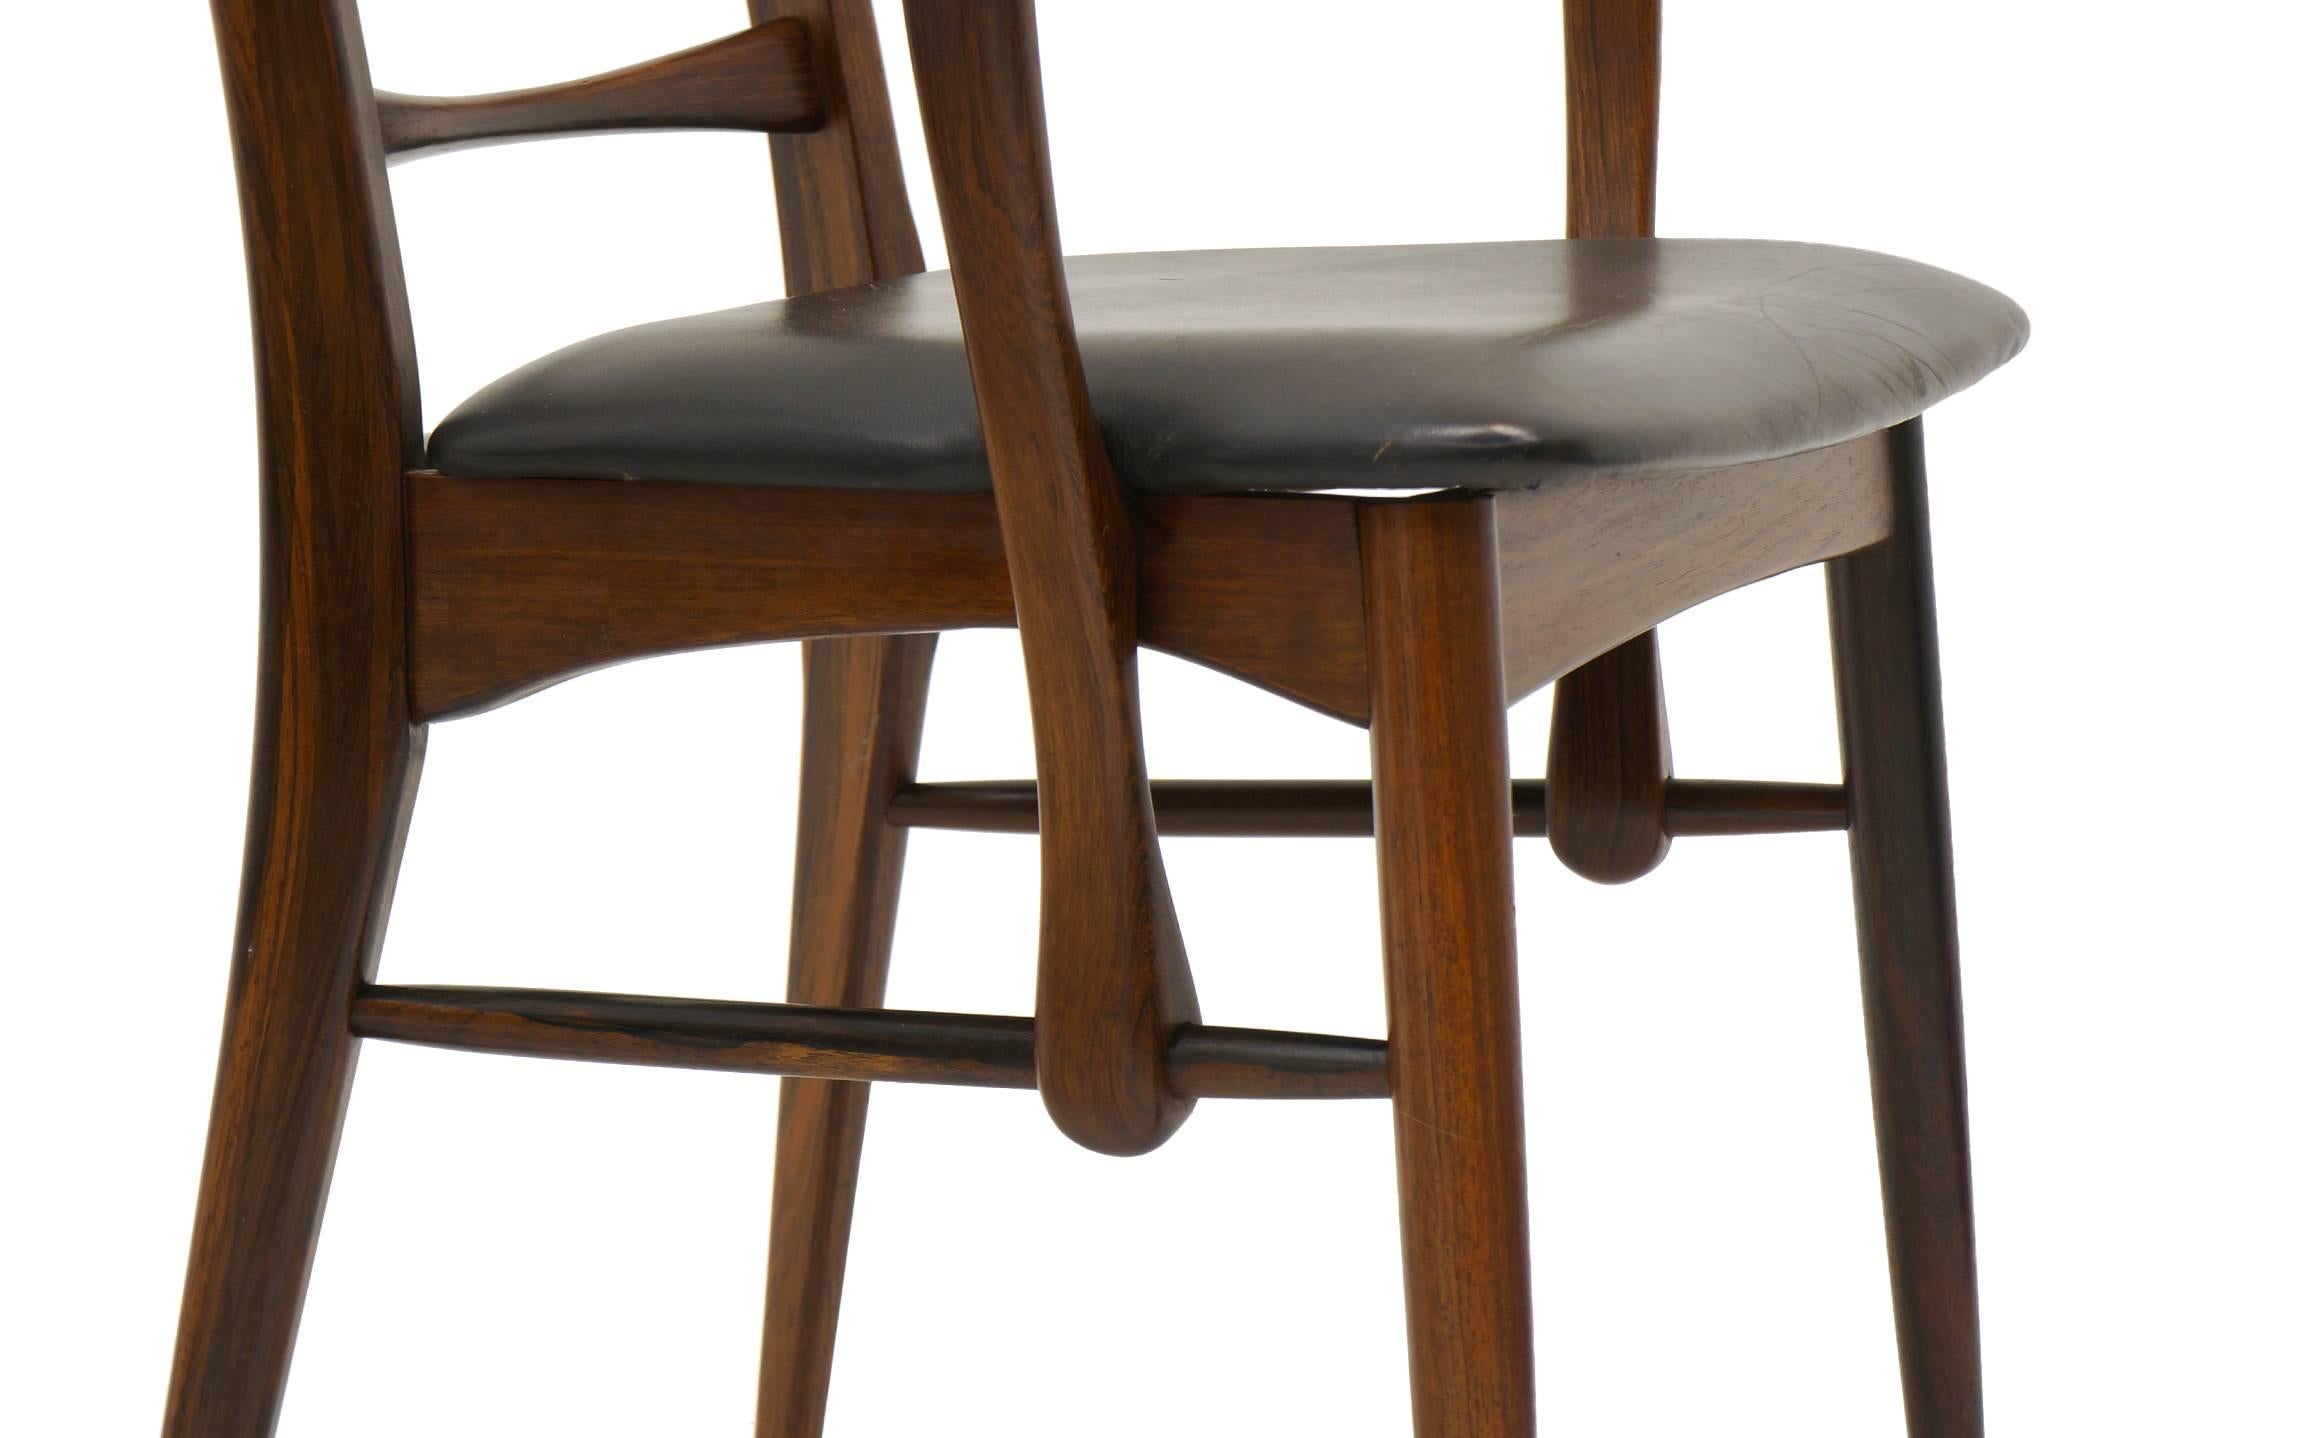 6 Rosewood Lis Dining Chairs by Niels Kofoed, Two with arms, Four armless 4